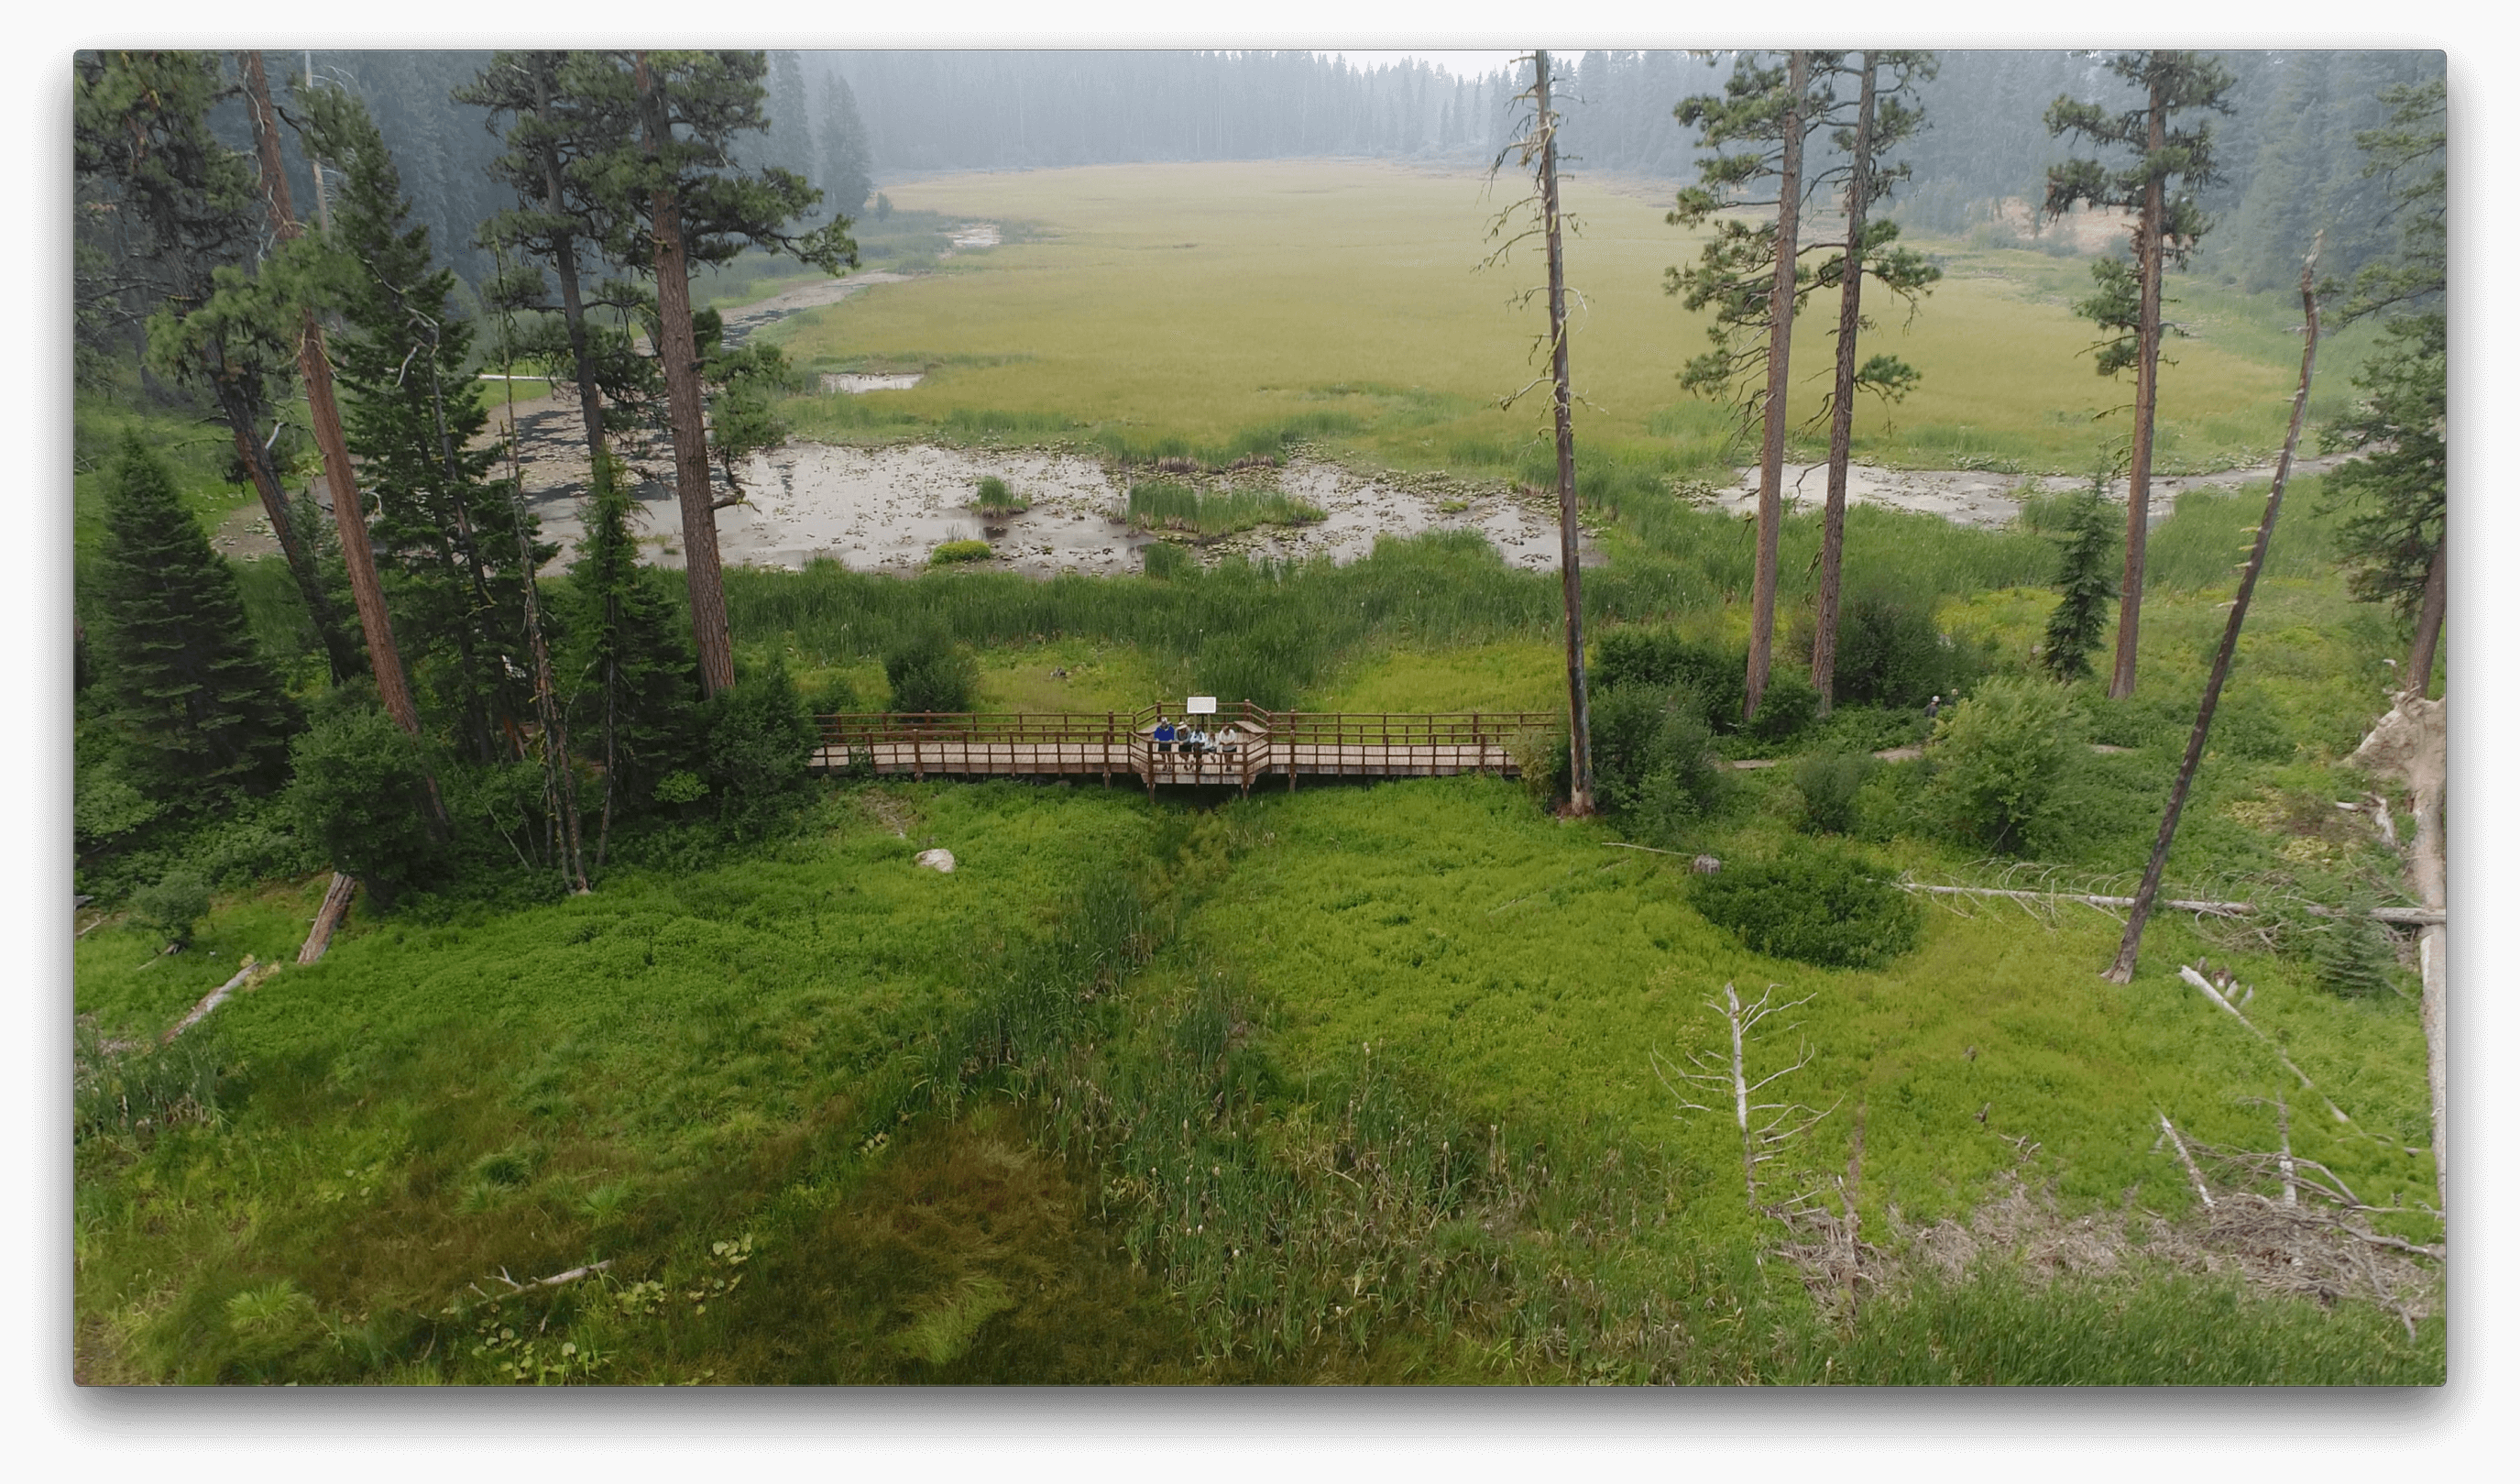 Aerial photo of marshy area, framed by a wooden walkway to the bottom of the frame.